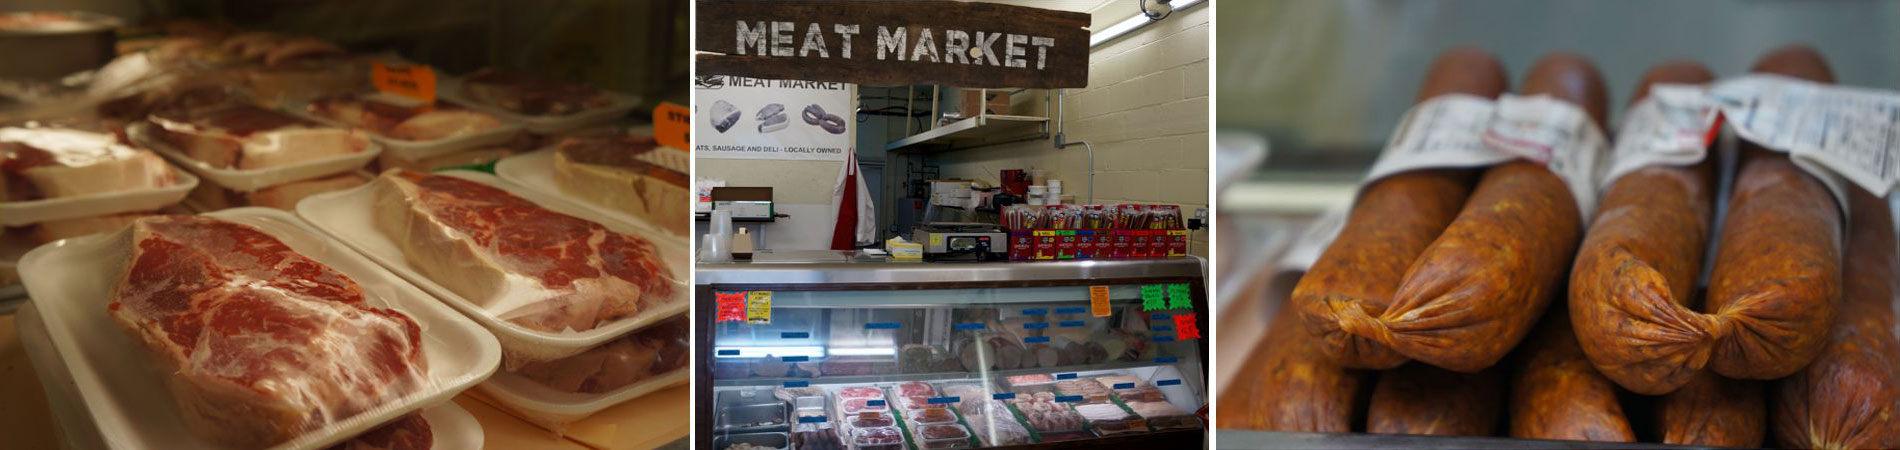 The Center MiniMart's meat selections